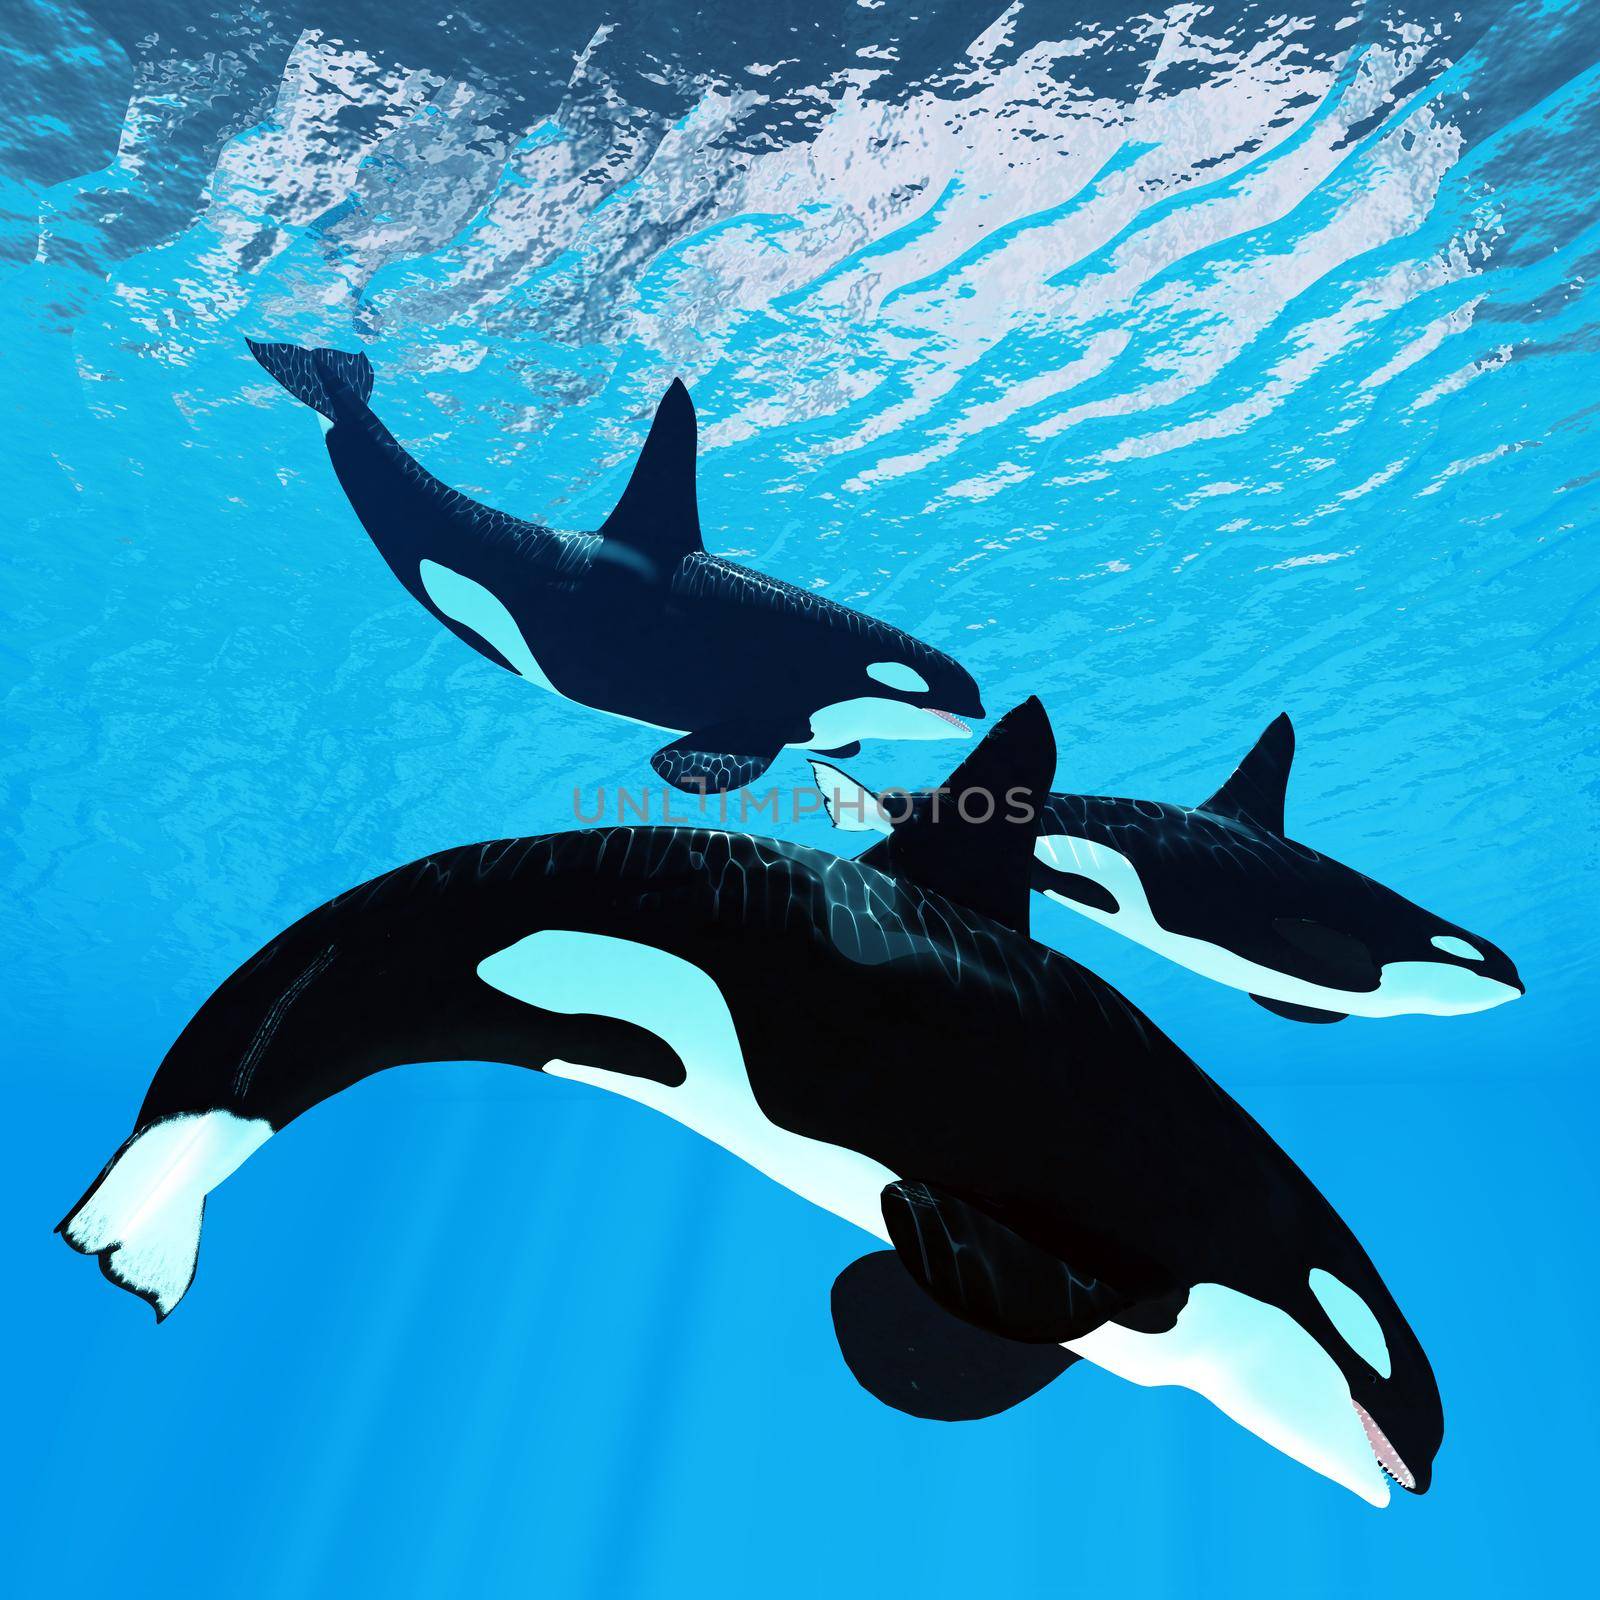 Three male bull Orca whales swim together near the surface of the ocean waves.